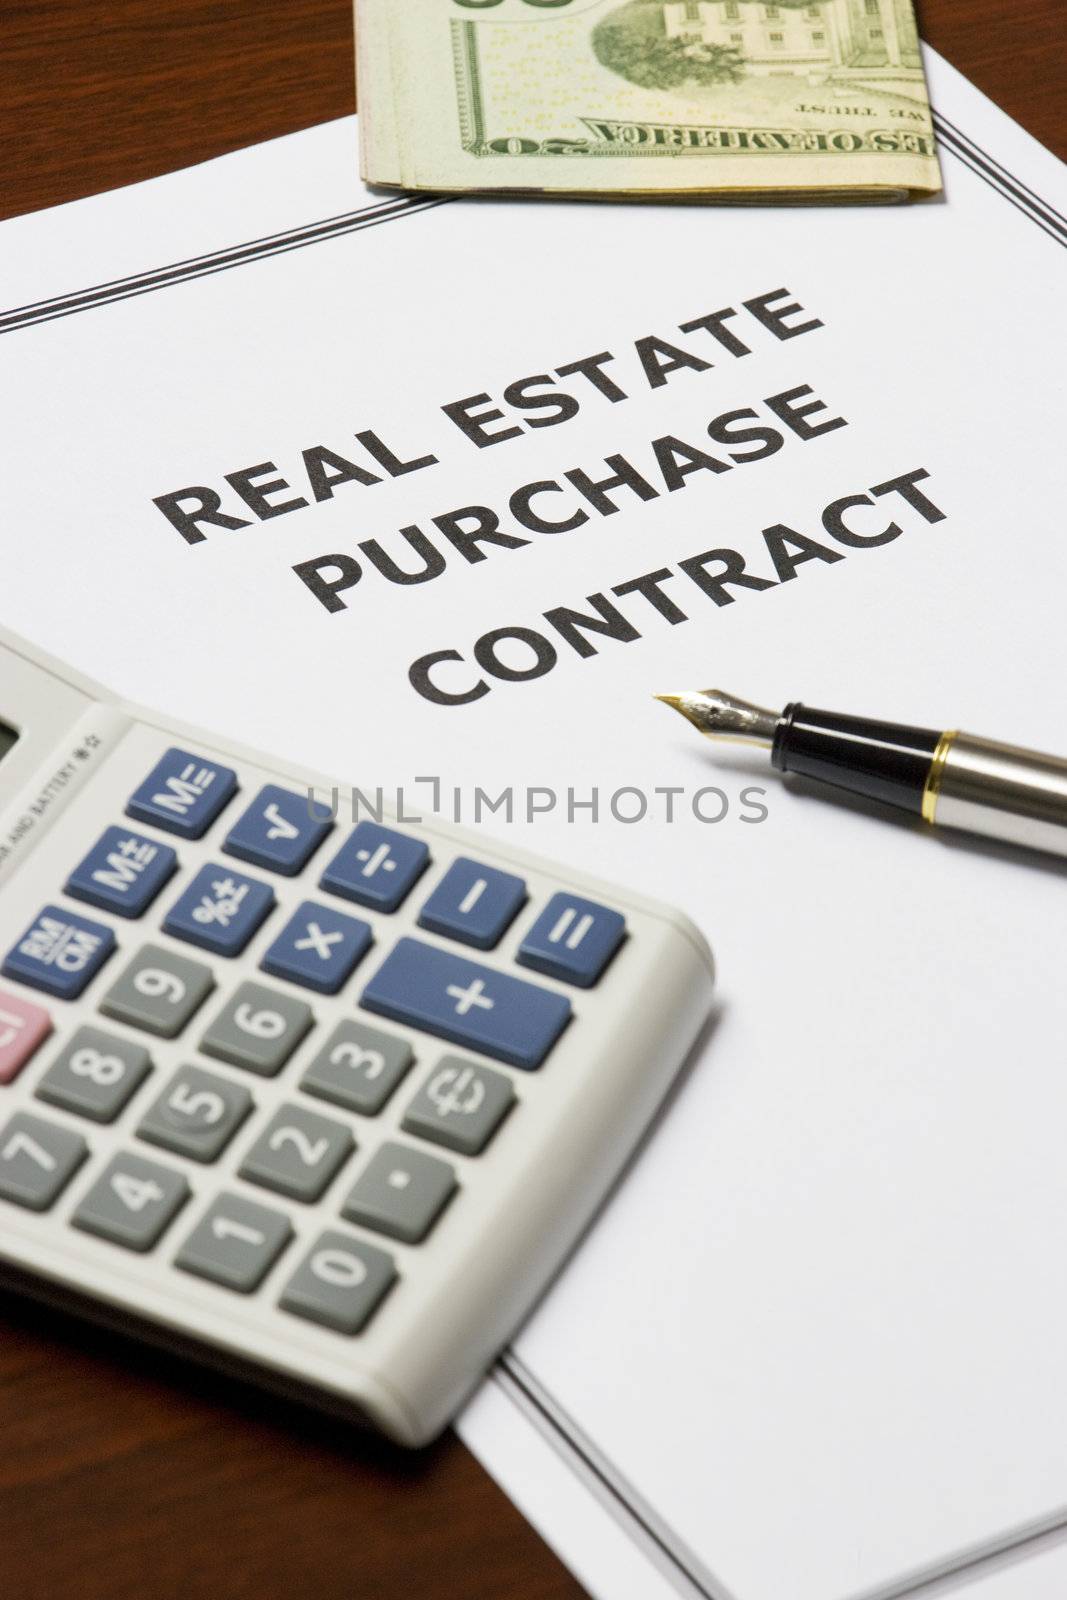 Image of a real estate purchase agreement on an office table.